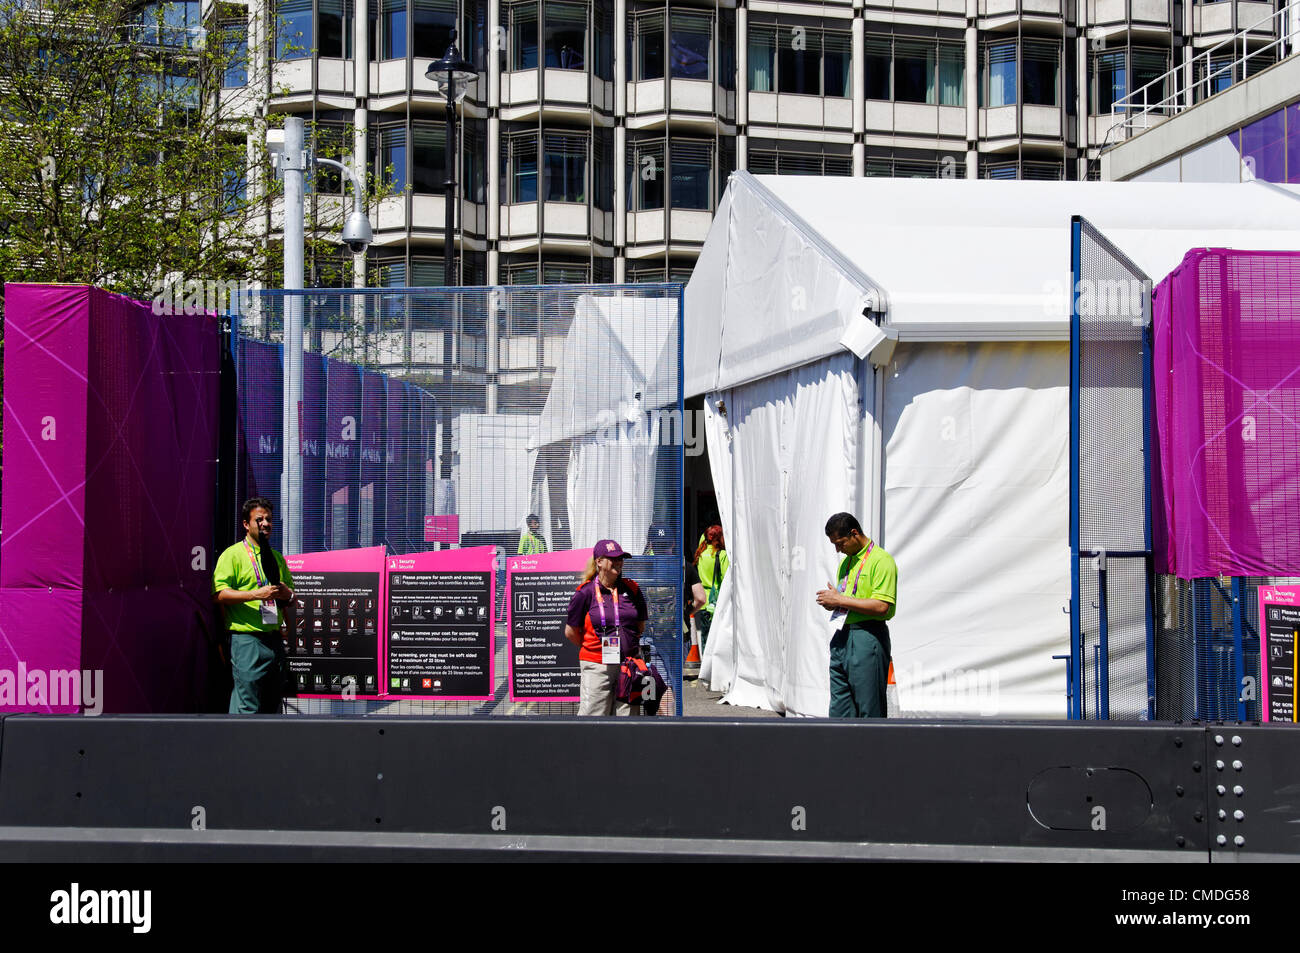 LONDON, UK, Monday July 23, 2012. The entrance of the Hilton Hotel on Park Lane is protected by high fences for security reasons. The London 2012 Olympic Games will be officially opened on Friday July 27, 2012 at 9pm. Stock Photo